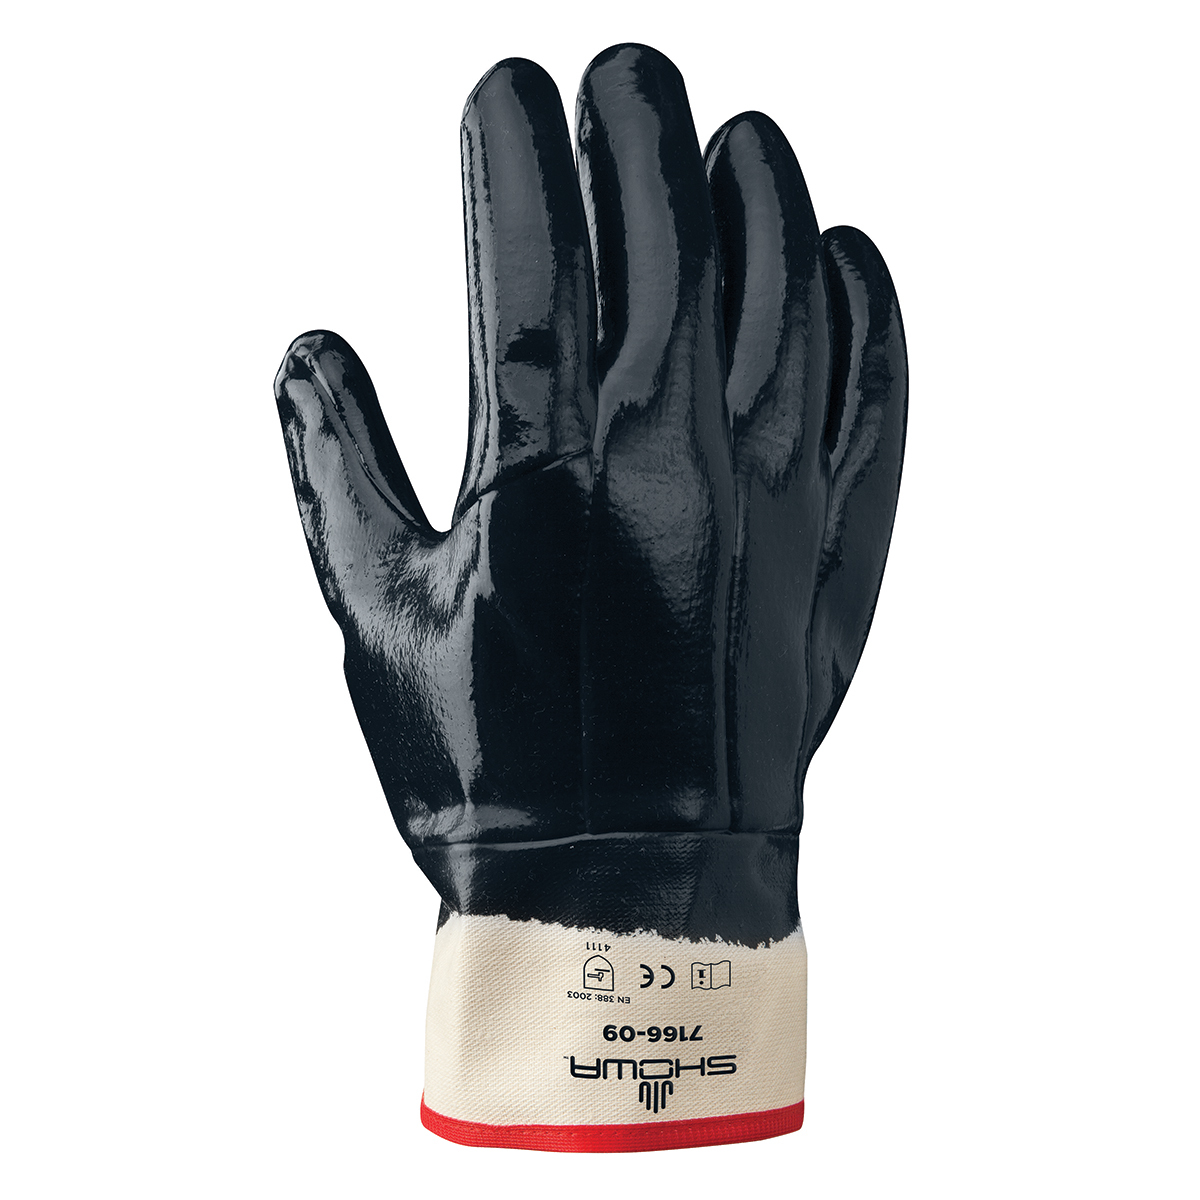 SHOWA® Heavy Duty Nitrile Full Hand Coated Work Gloves With Cotton Liner And Safety Cuff